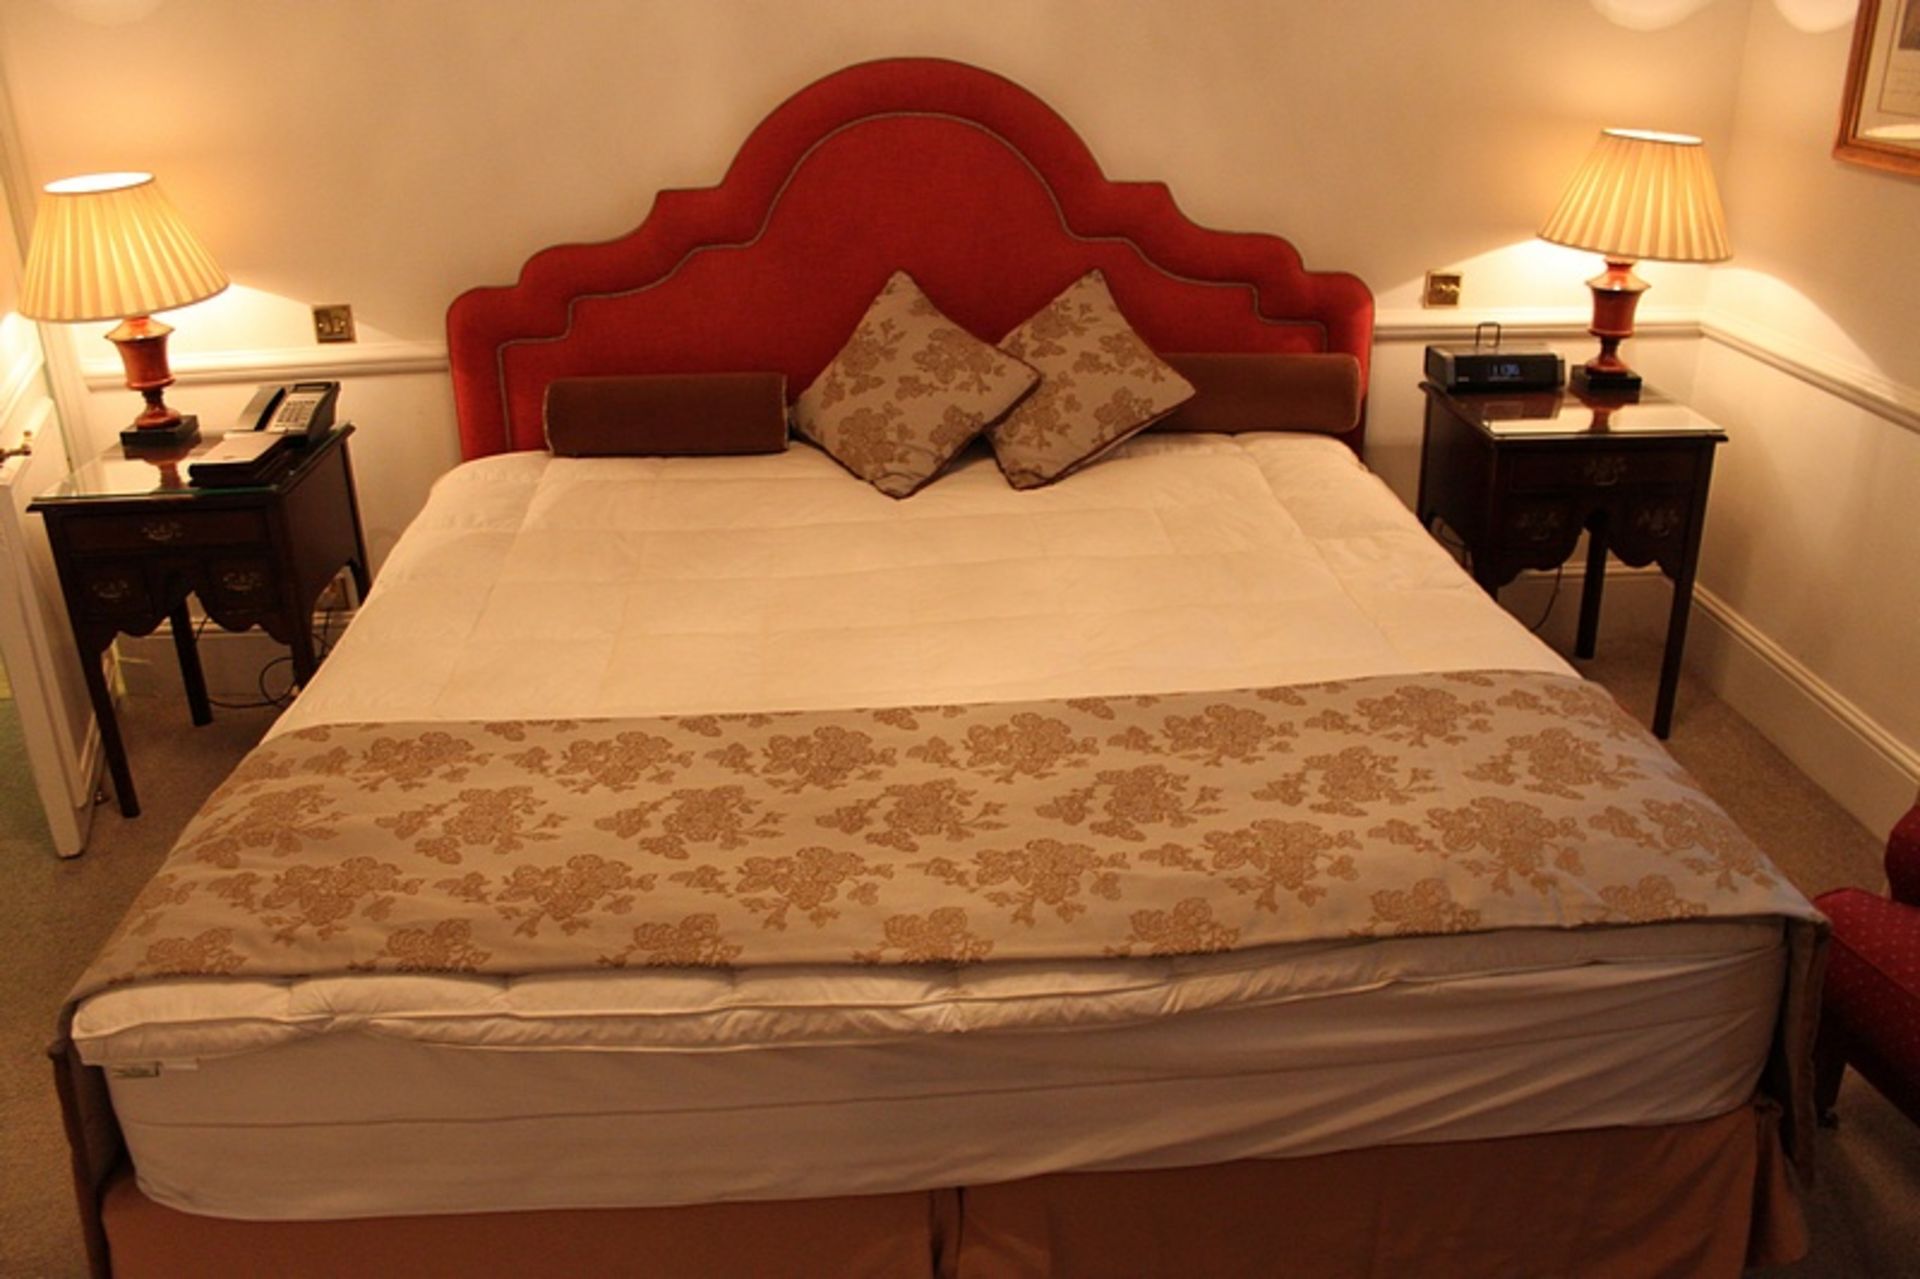 Hospitality Simmons Bedding Company base, mattress and large red domed headboard complete with